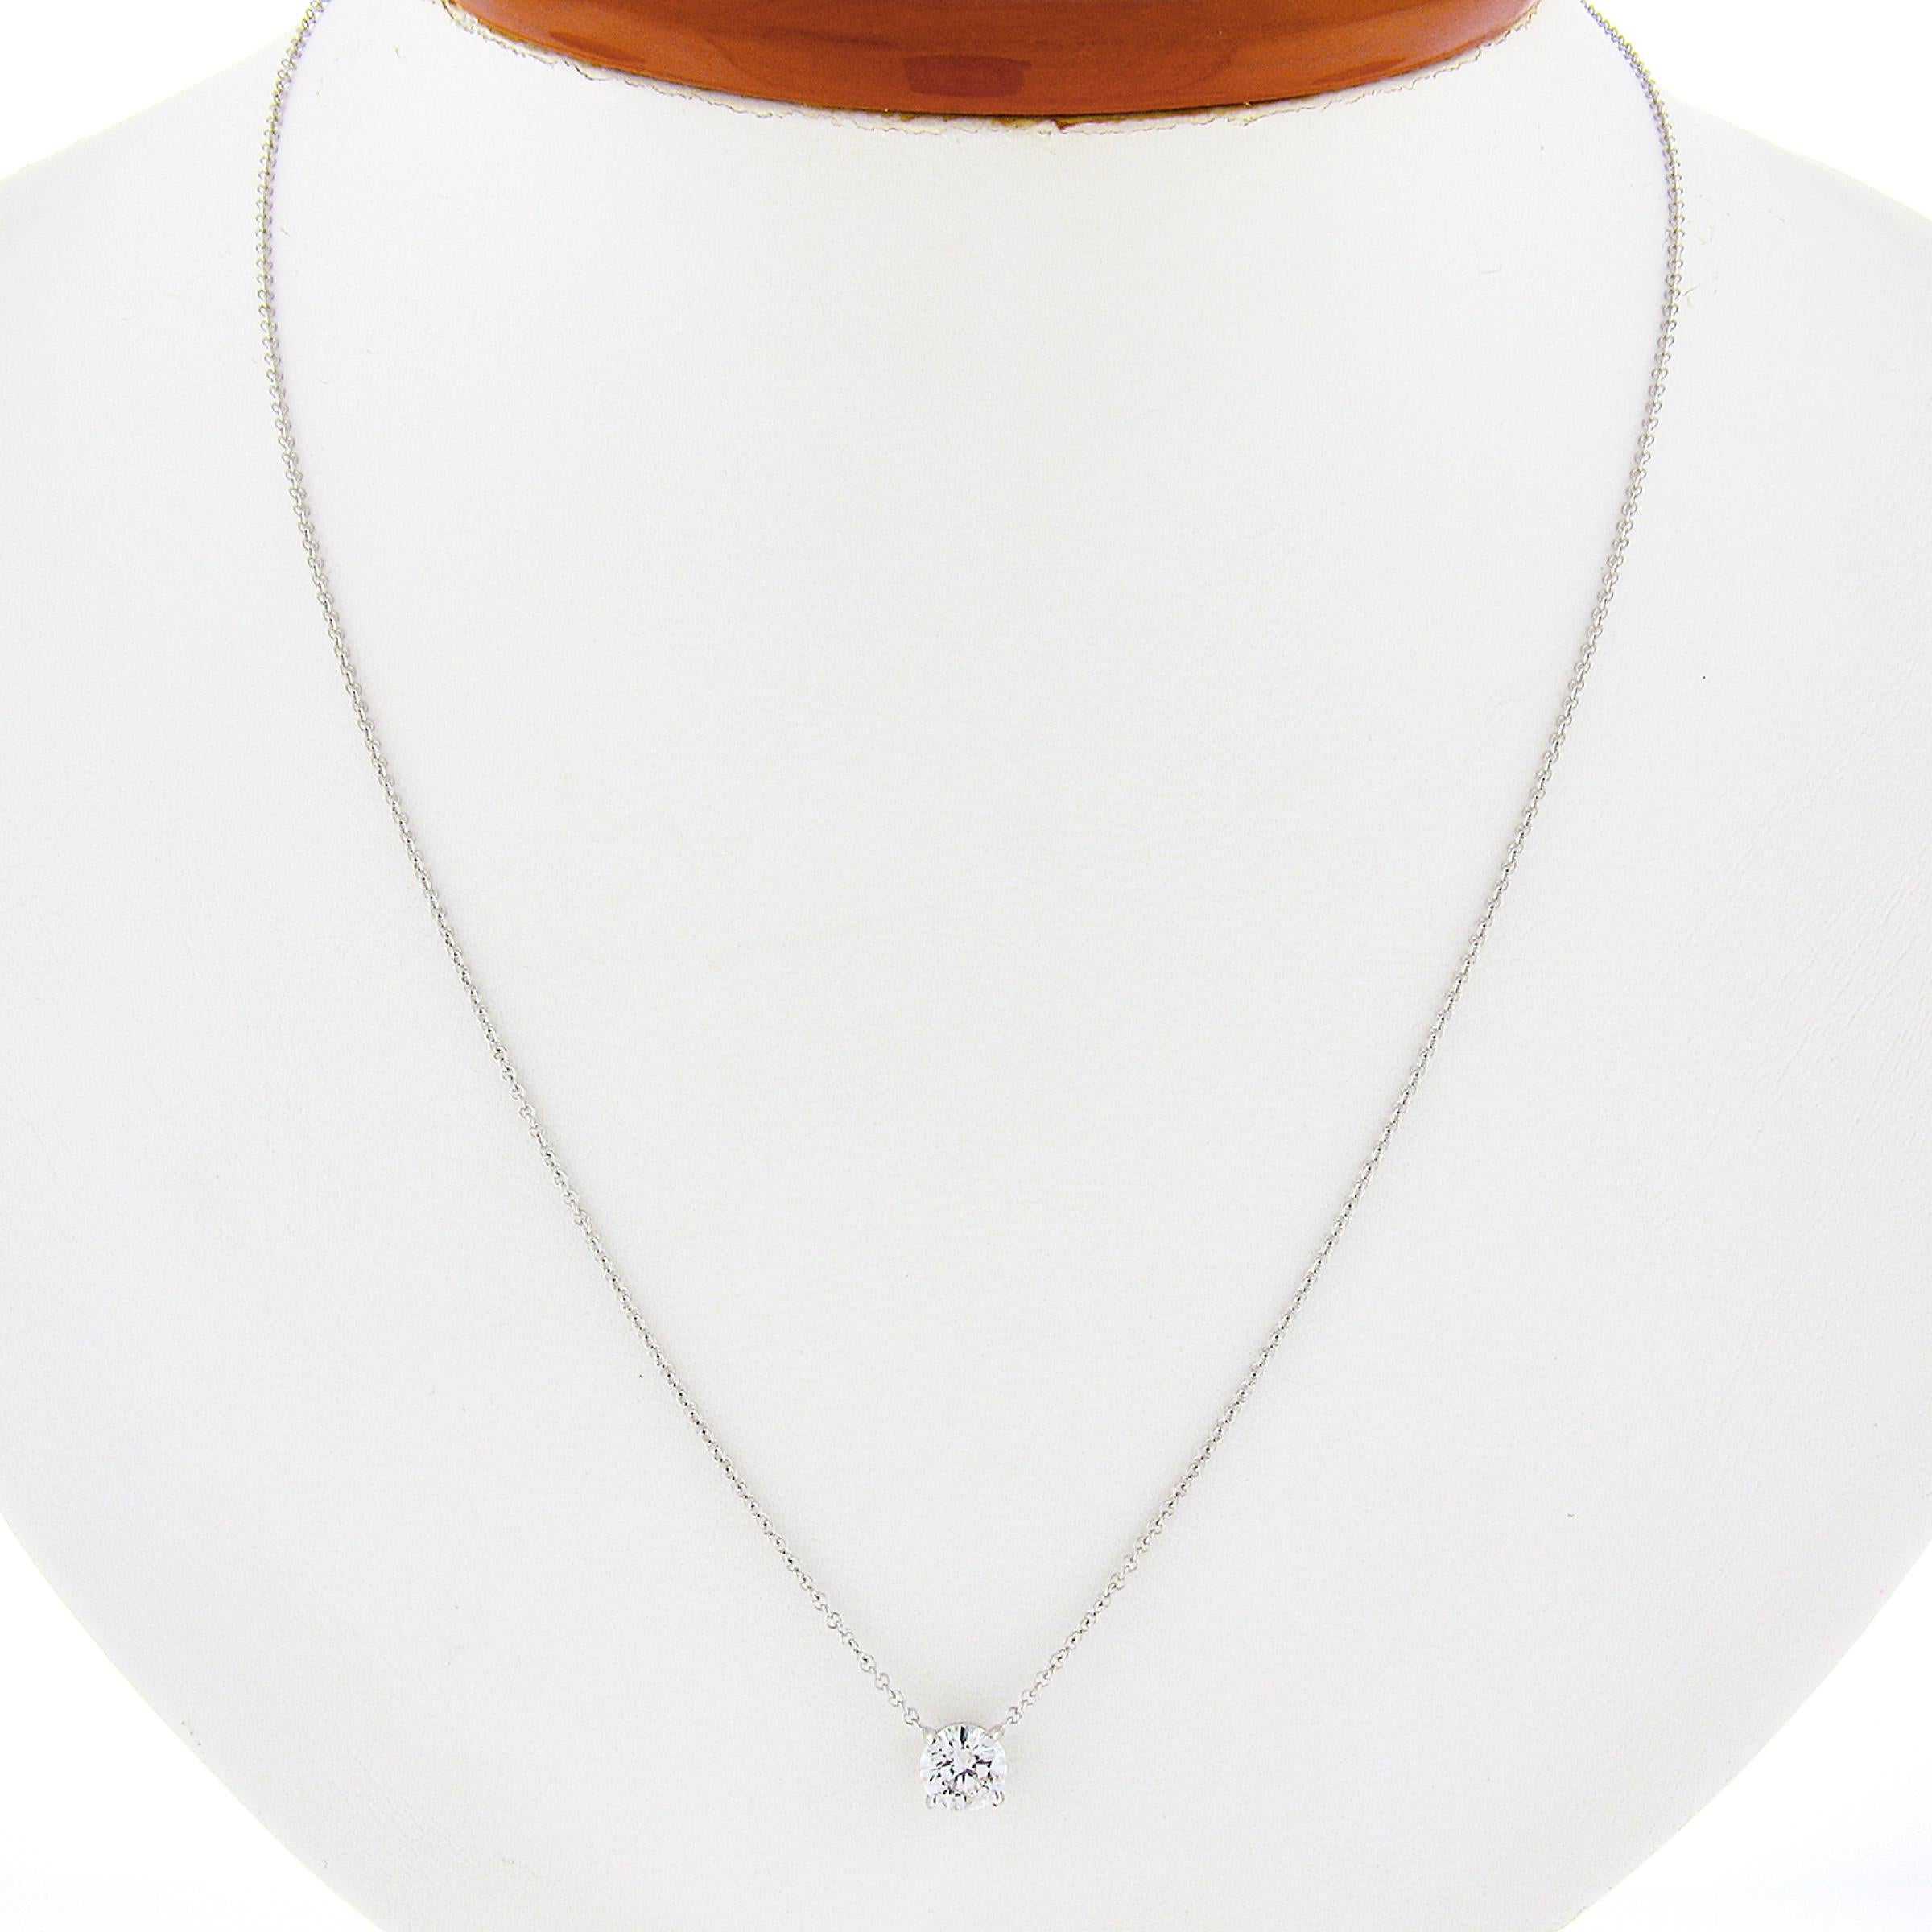 You are looking at a simple and classically styled diamond solitaire pendant that is newly crafted in solid 14k white gold. The round brilliant cut diamond on this pendant is neatly prong set in an open basket and weighs exactly 0.57 carats,